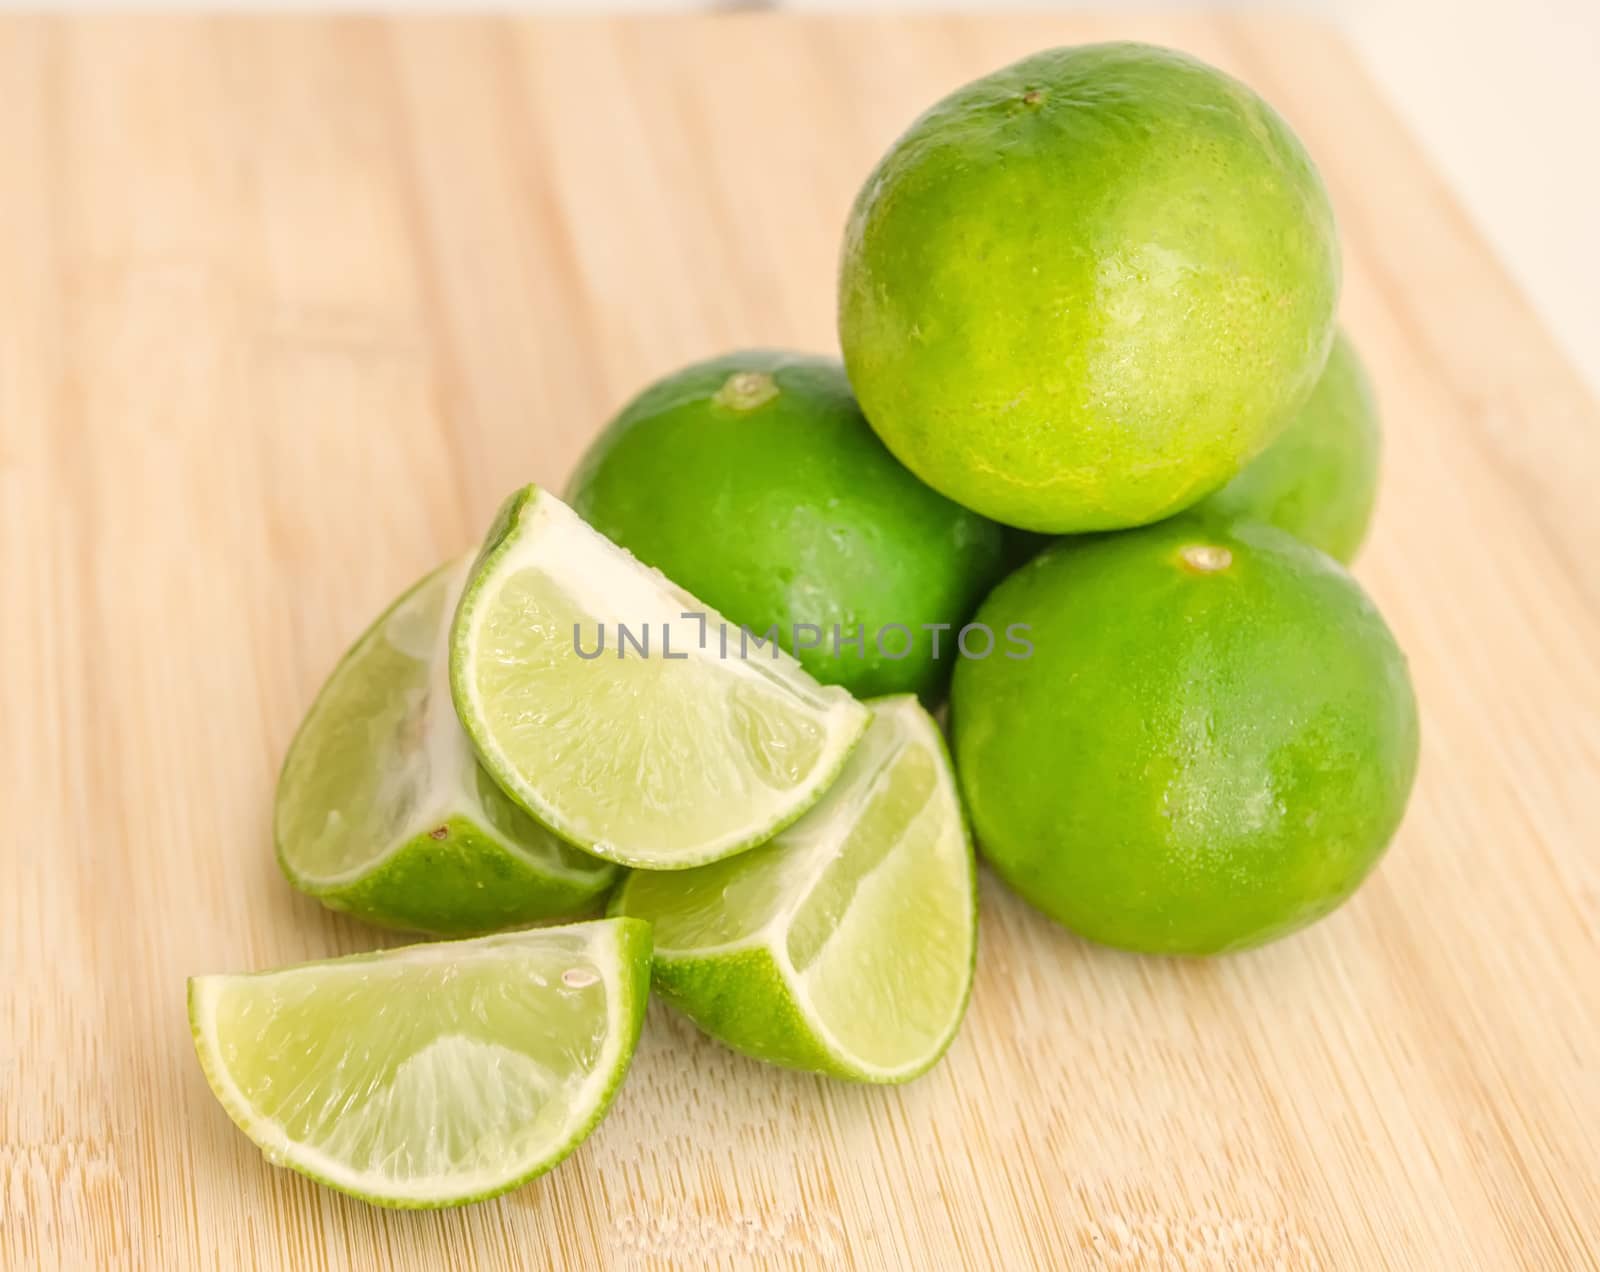 Group of green limes. Sour fresh and healthy